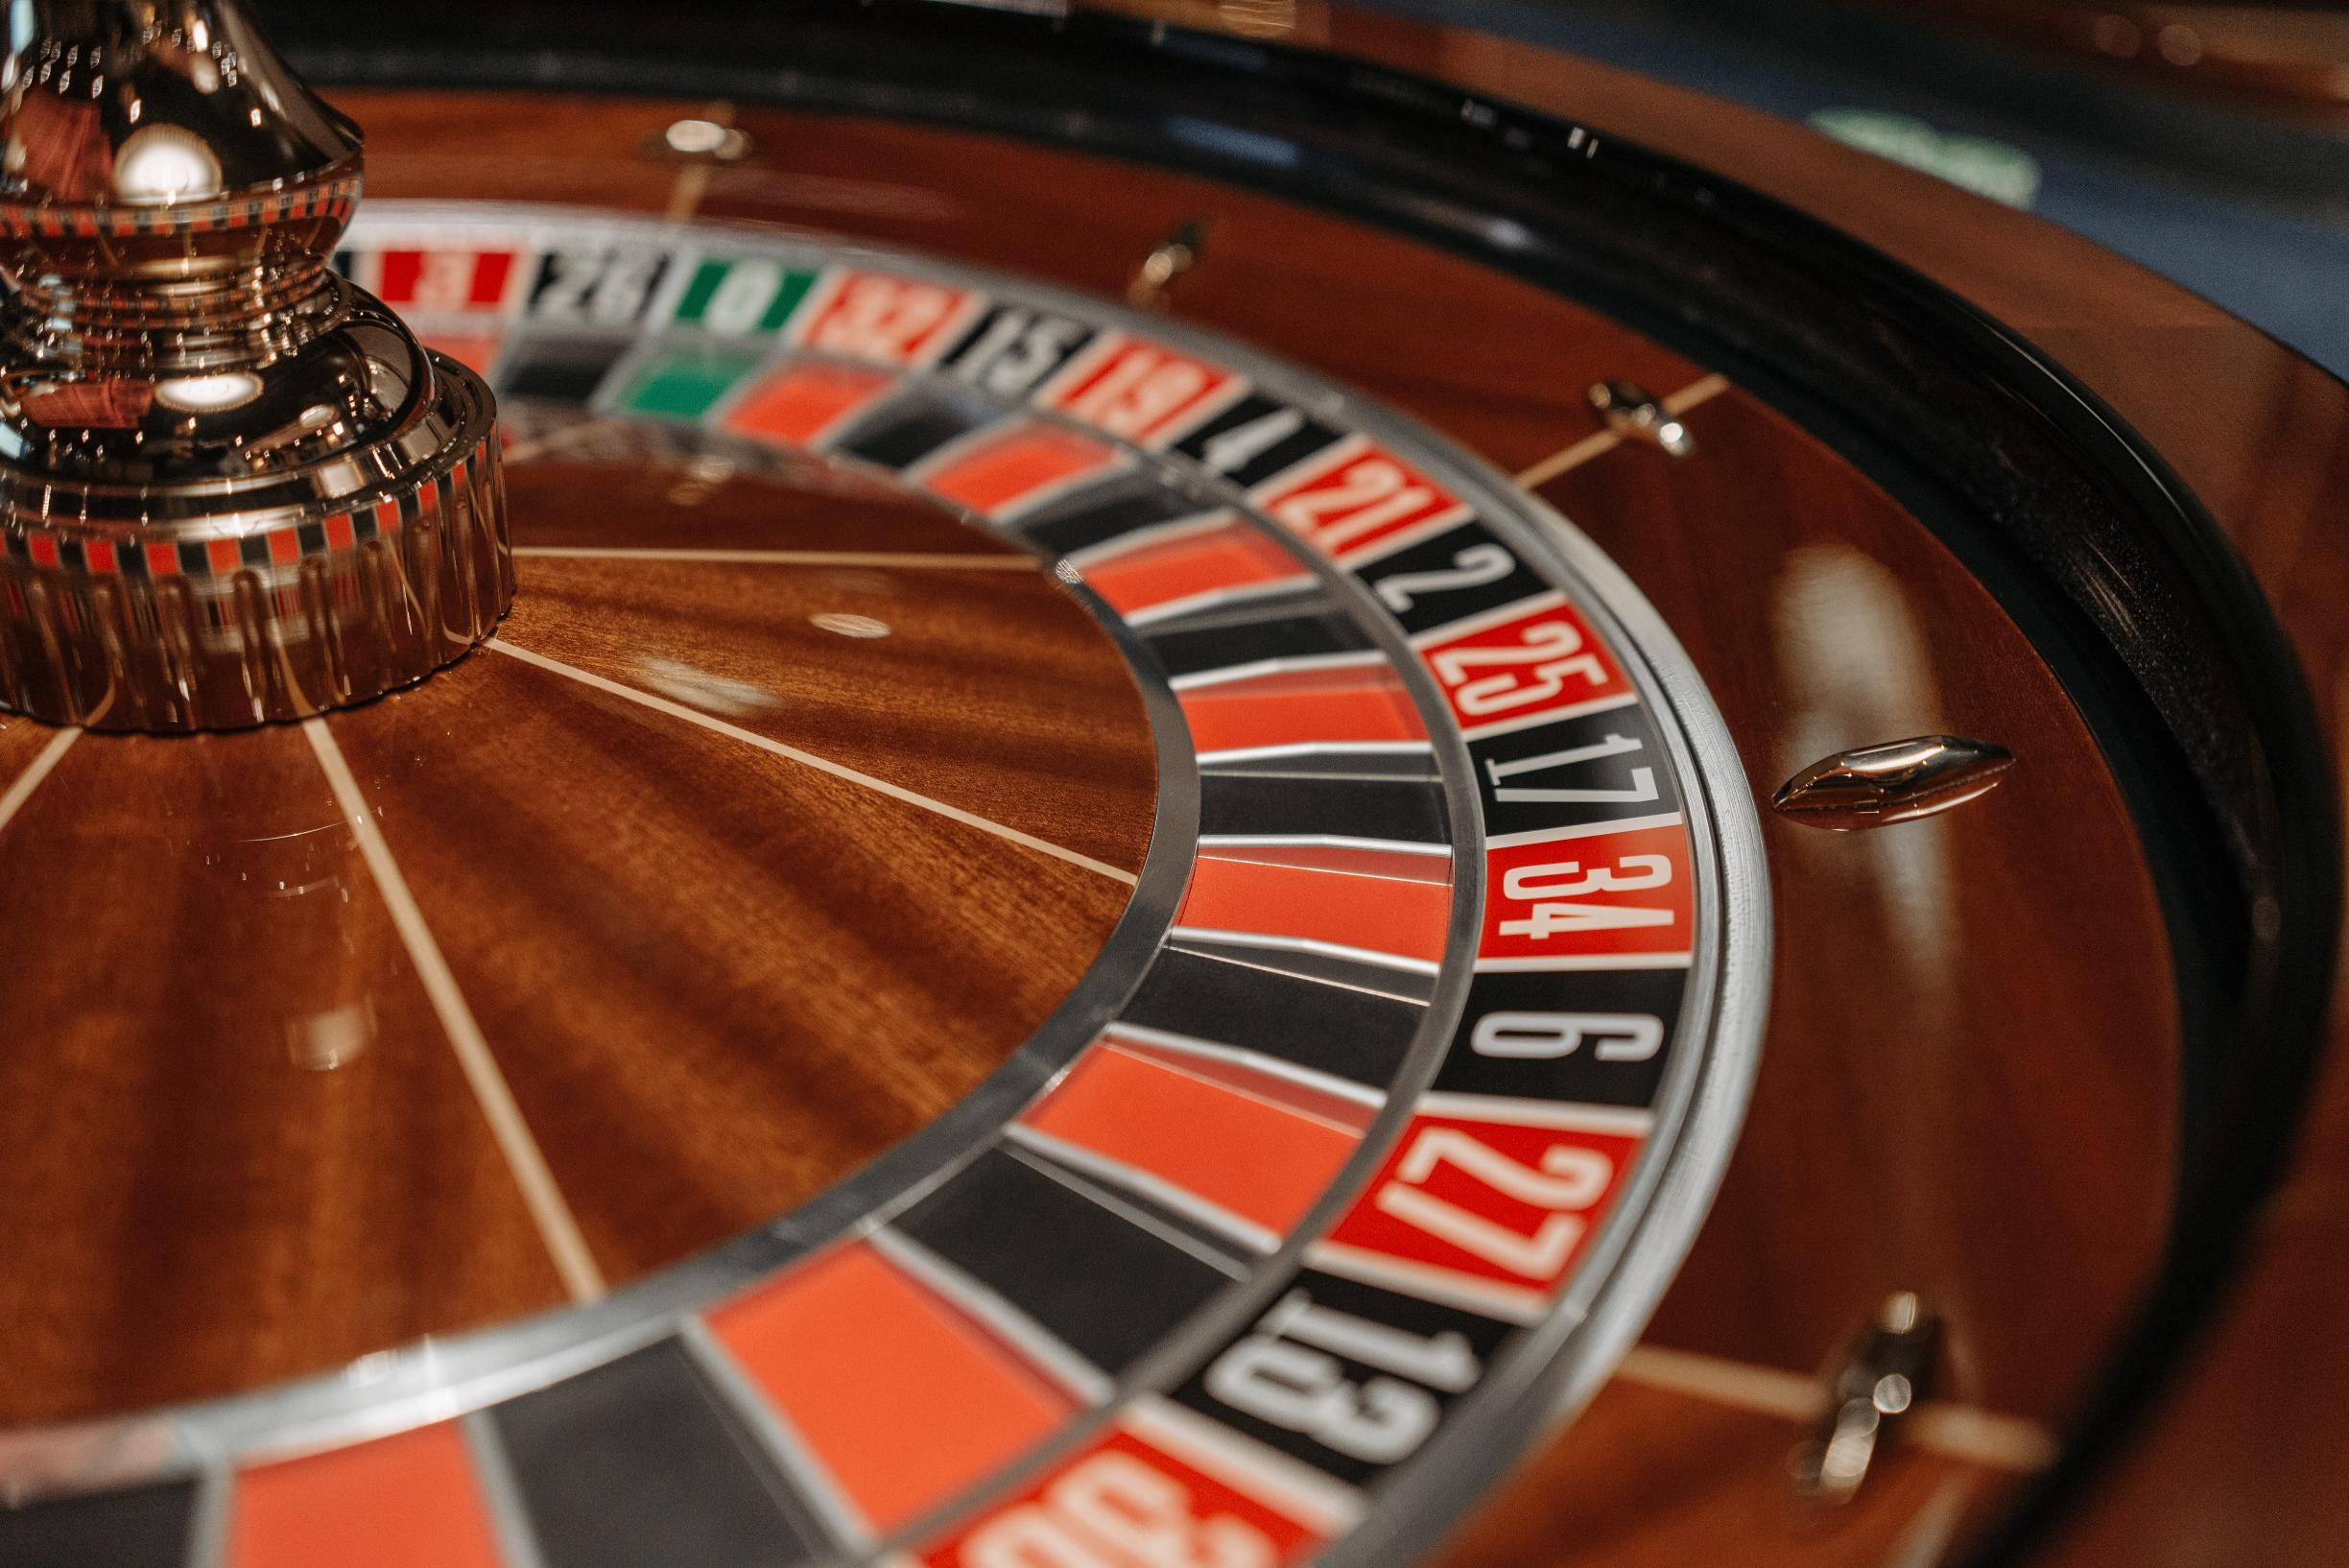 The Psychology of Gambling: What Makes People Keep Coming Back to Casinos